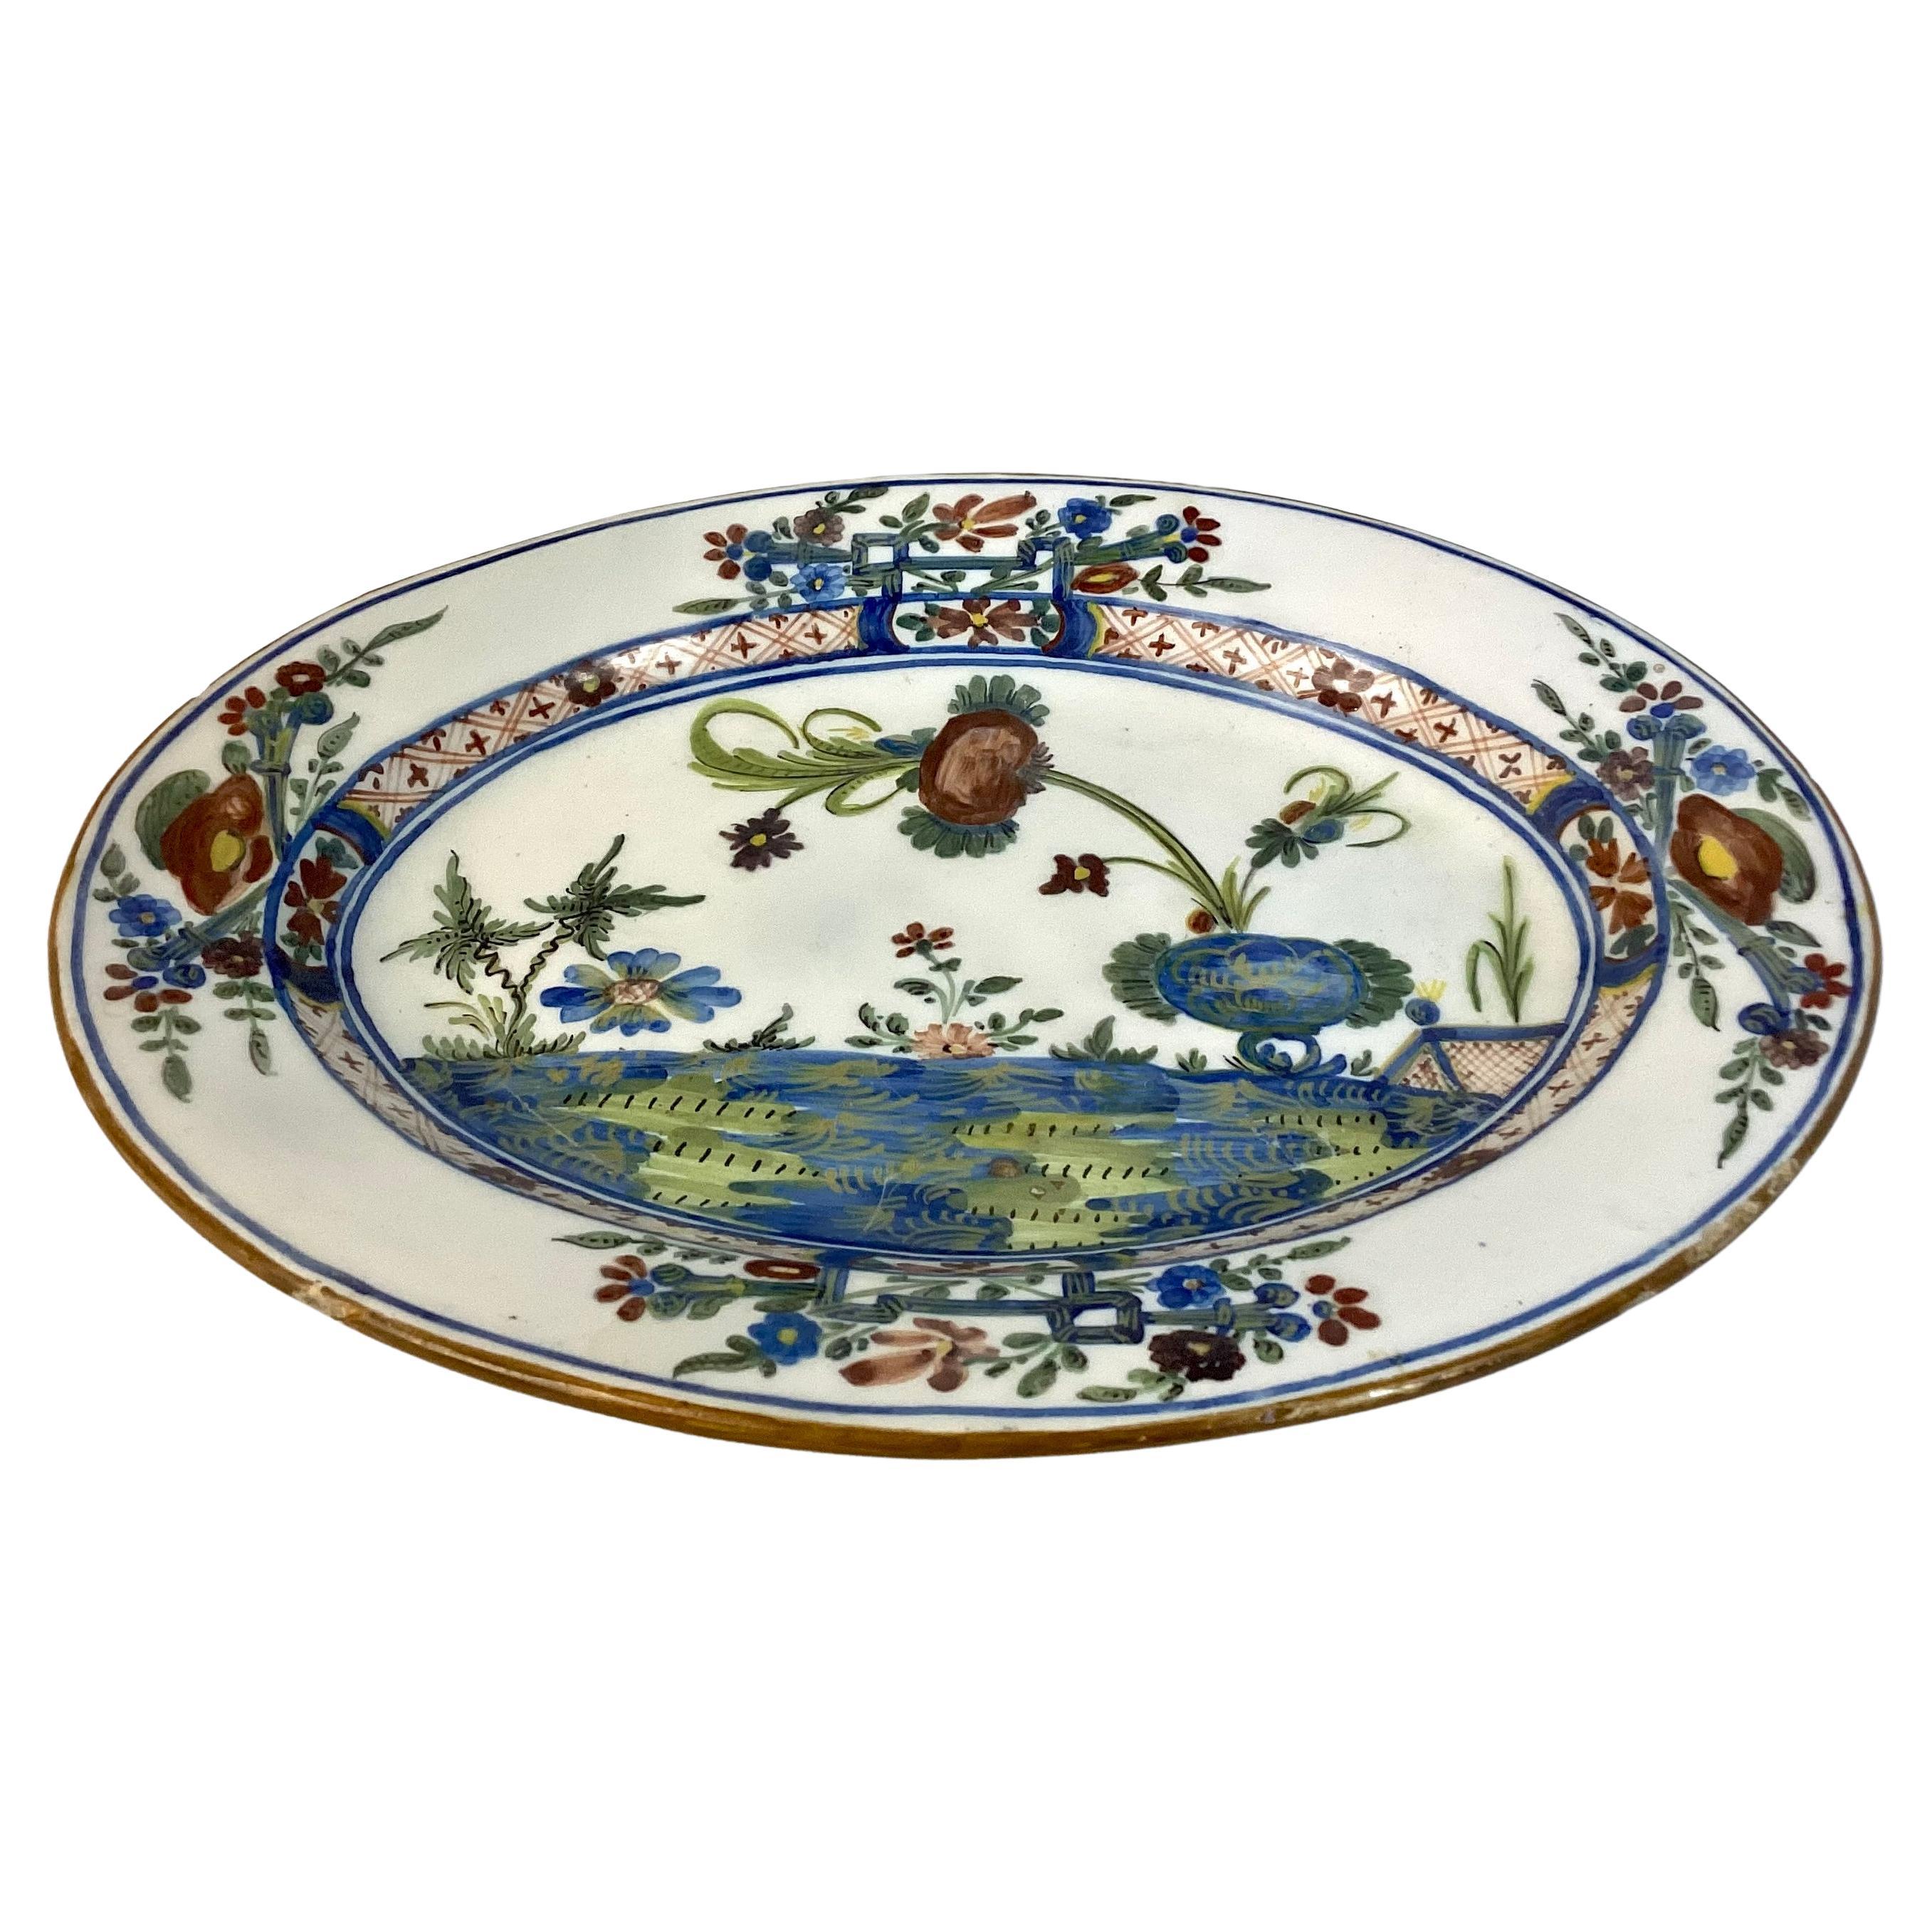 Large 19th Century Italian Ceramic Serving Platter. Platter in Faenza Garofano Blue Carnation pattern features flora in colors of blue, green, brown on a white background. Solid white on reverse side, no signature.